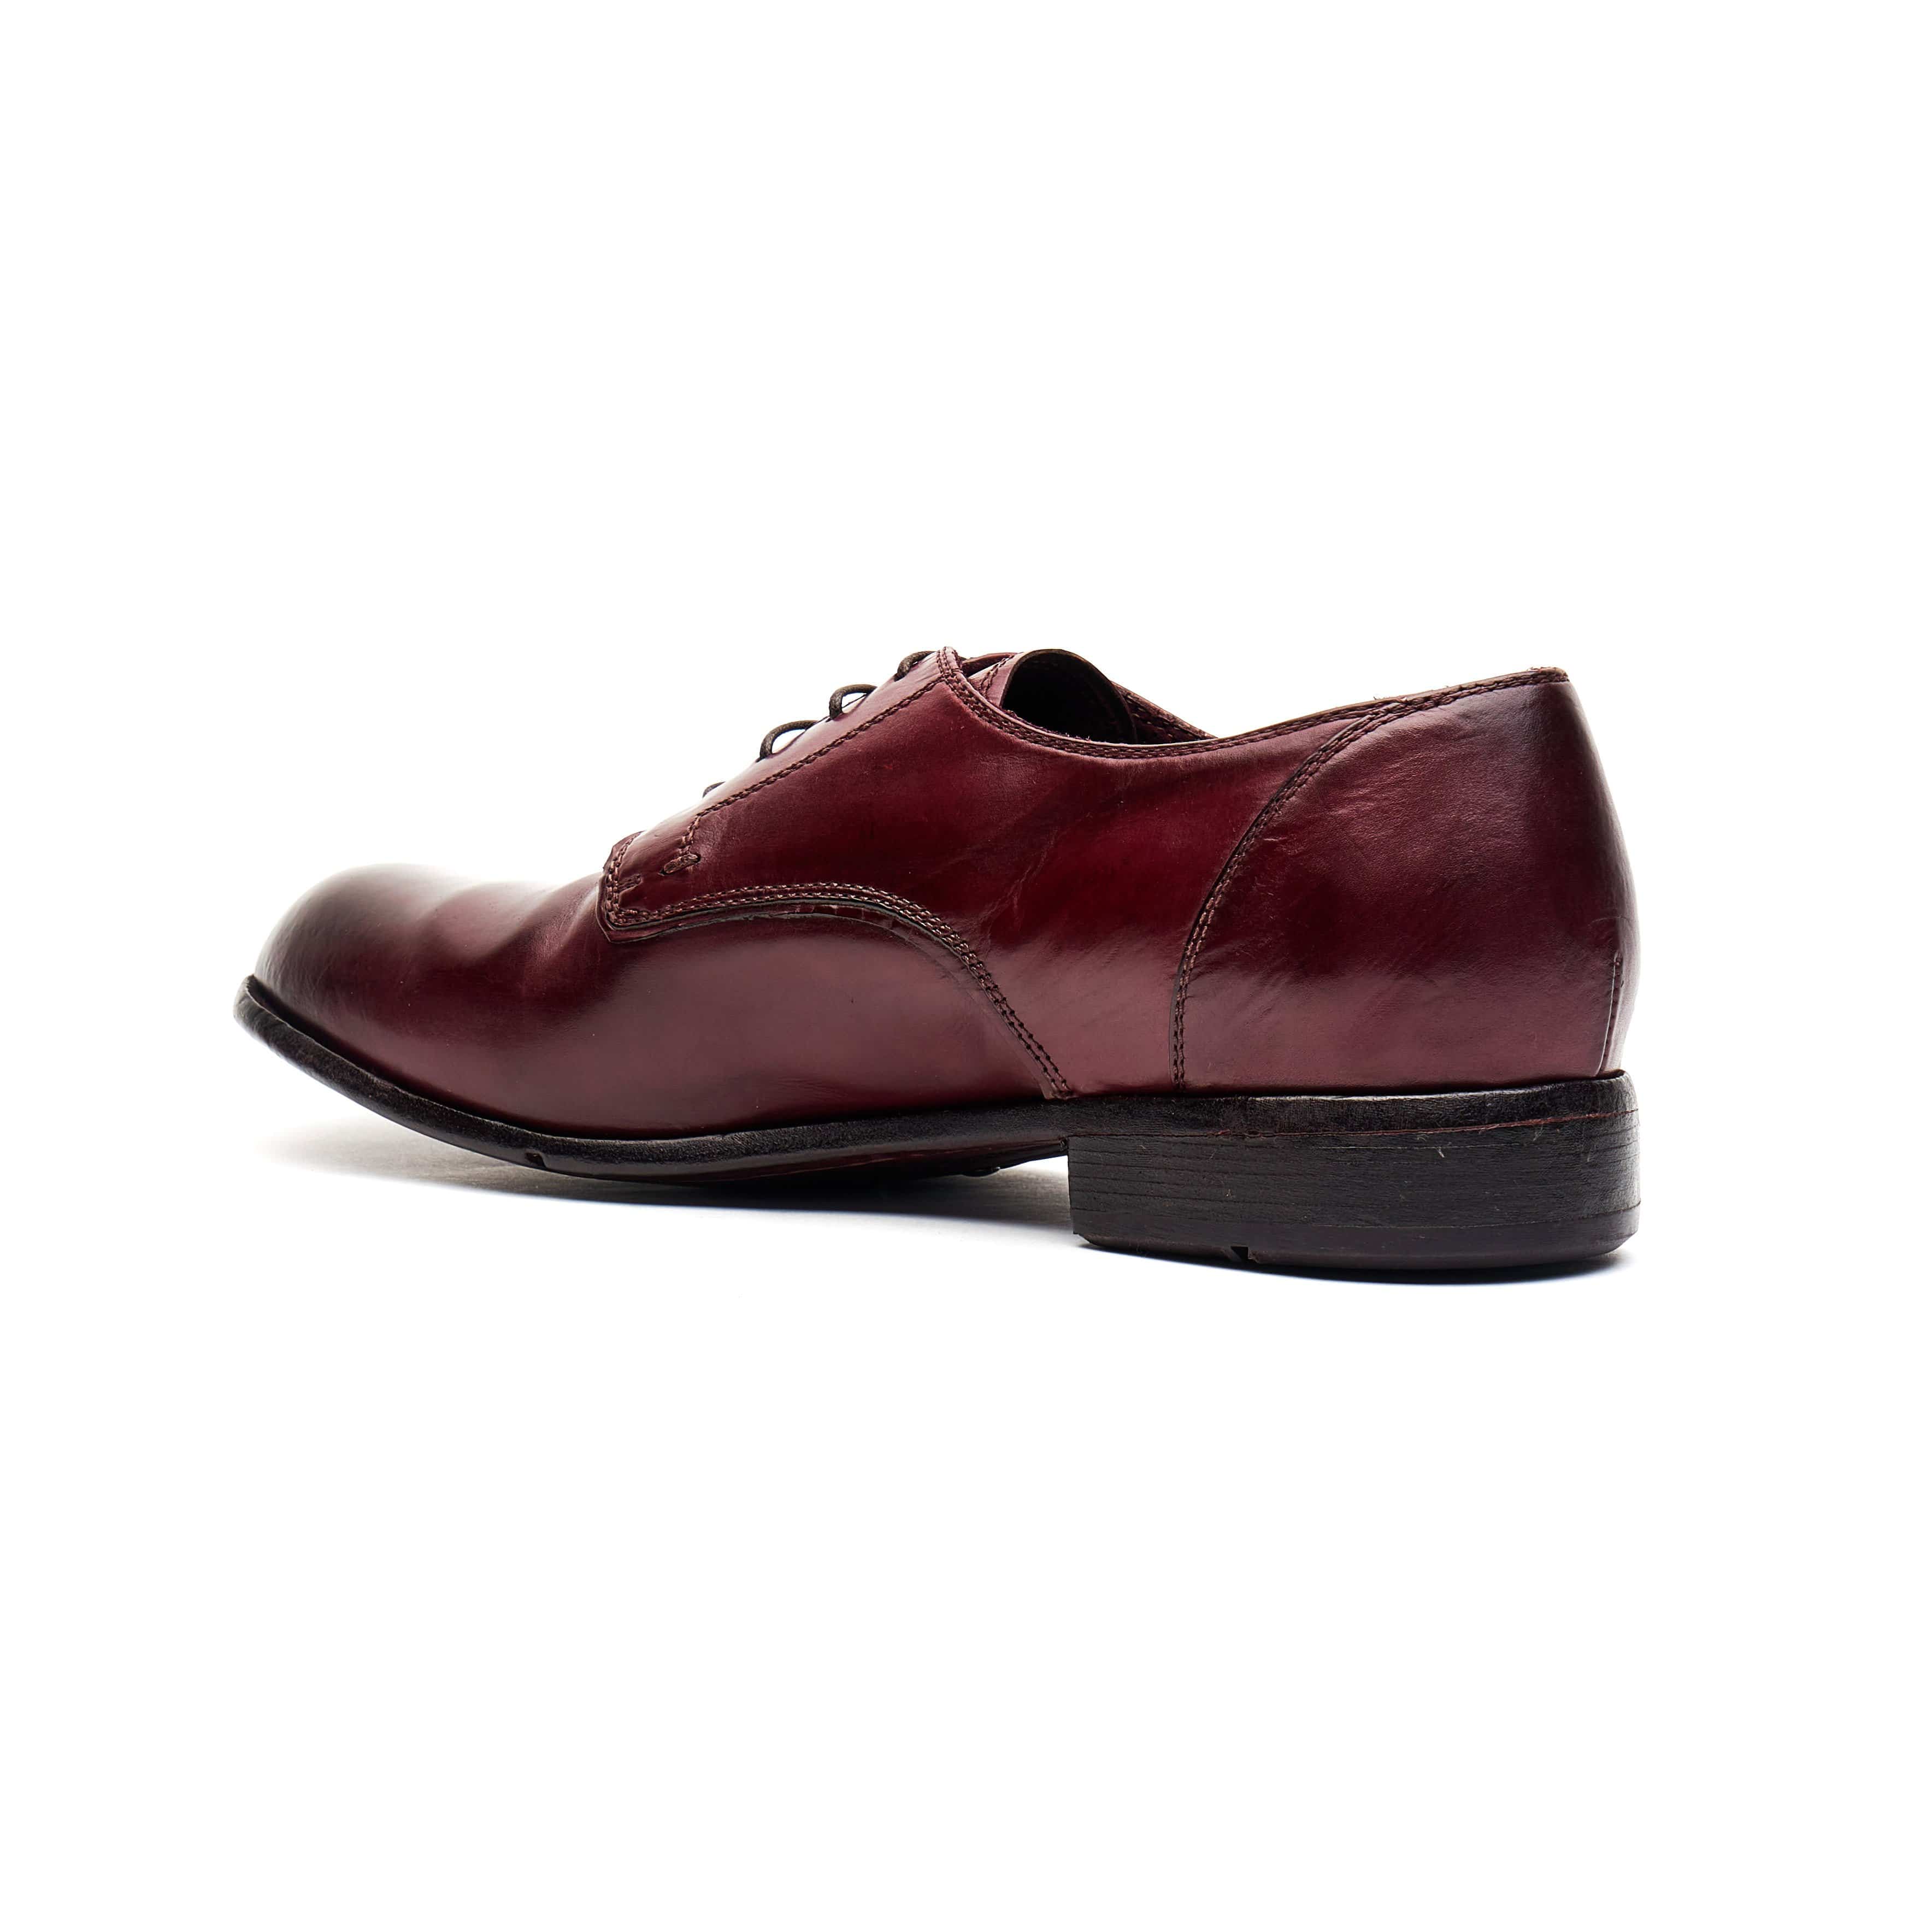 Lemargo DF03A Burgundy Lace Up Derby - 124 Shoes